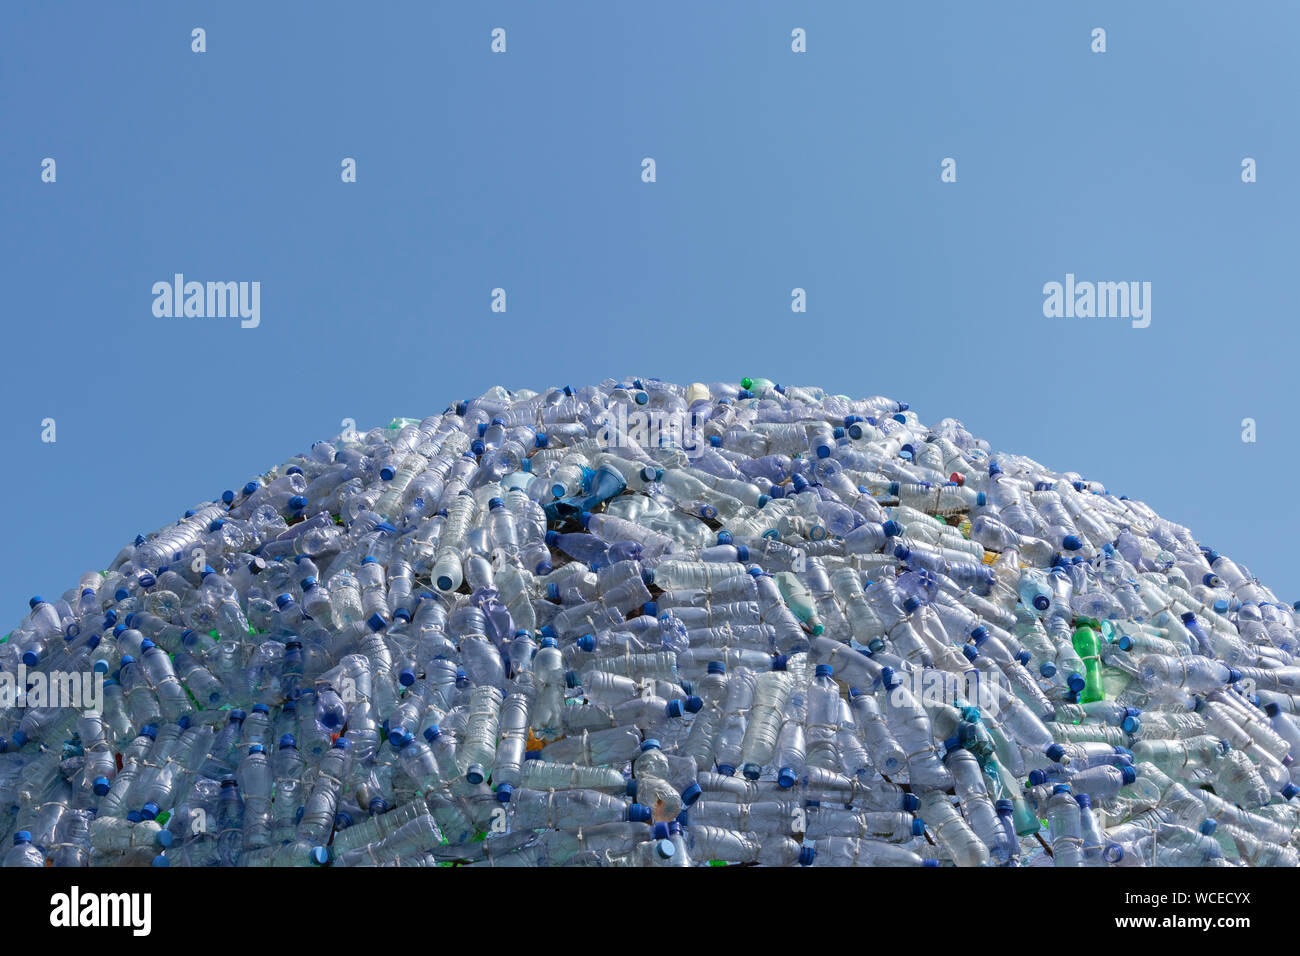 semicircular mountain of plastic waste, plastic bottles with a beautiful blue background Stock Photo